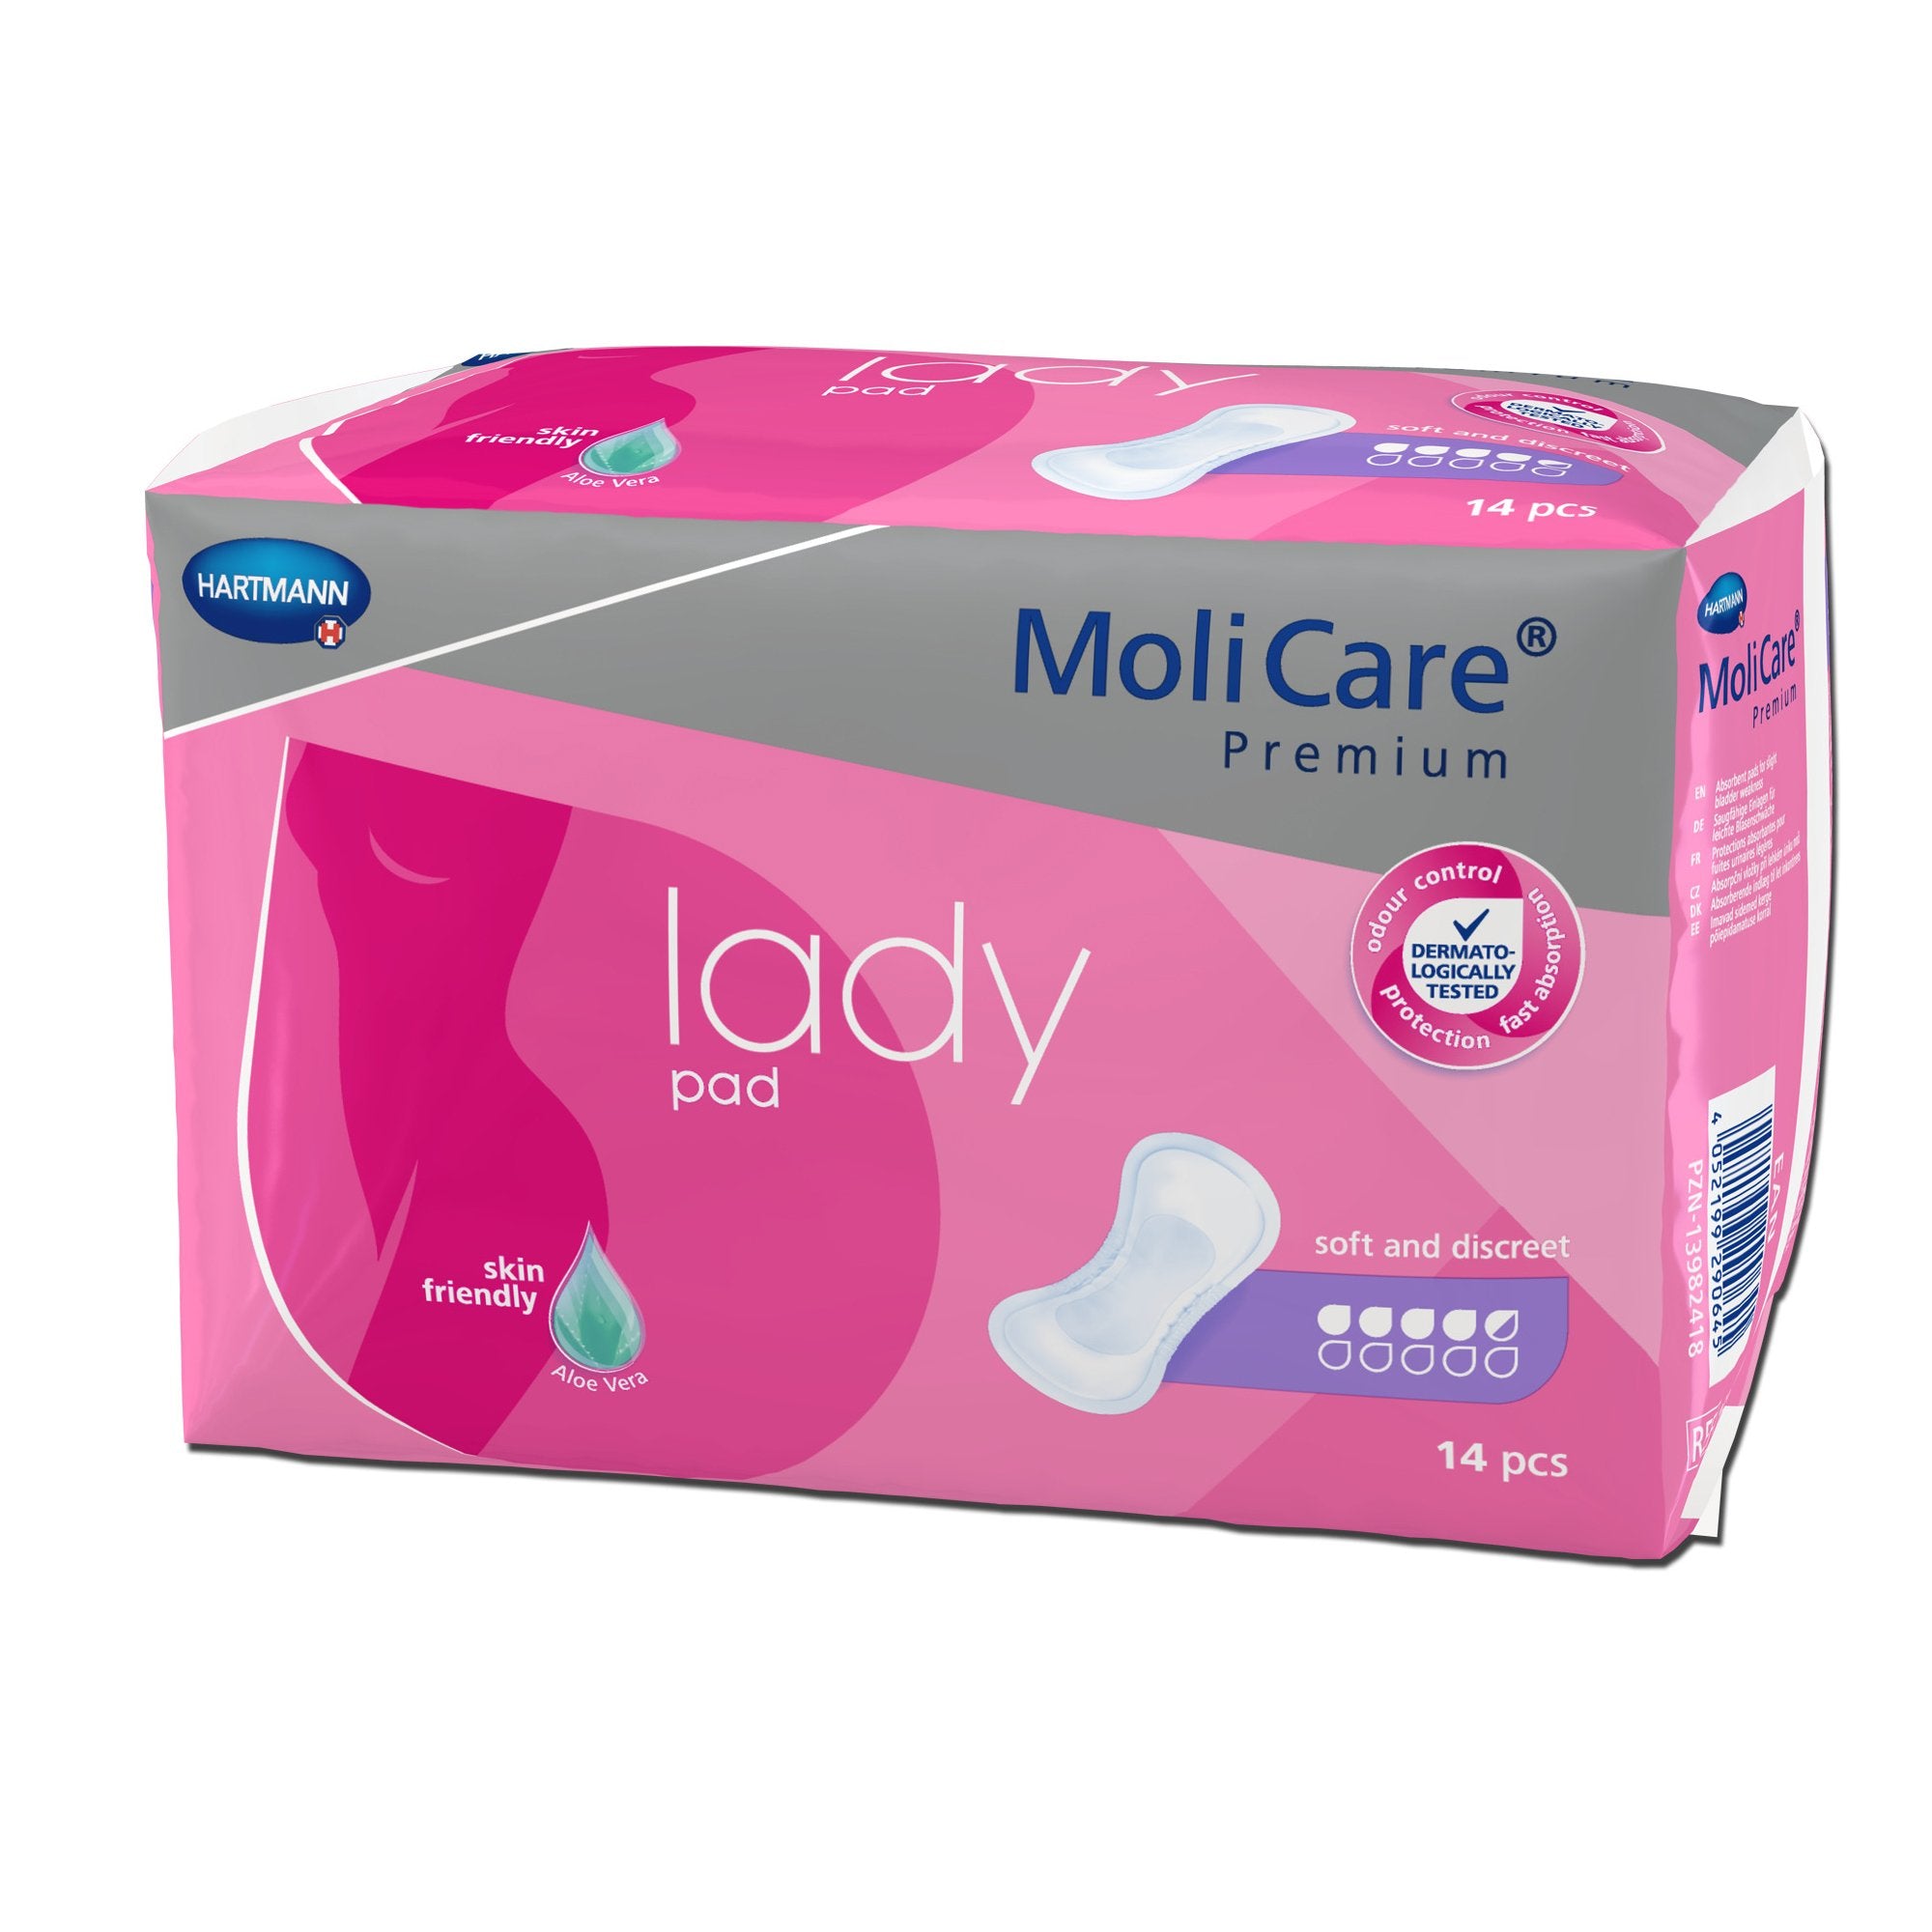 Bladder Control Pad MoliCare Premium Lady Pads 6-1/2 X 16 Inch Moderate Absorbency Polymer Core One Size Fits Most